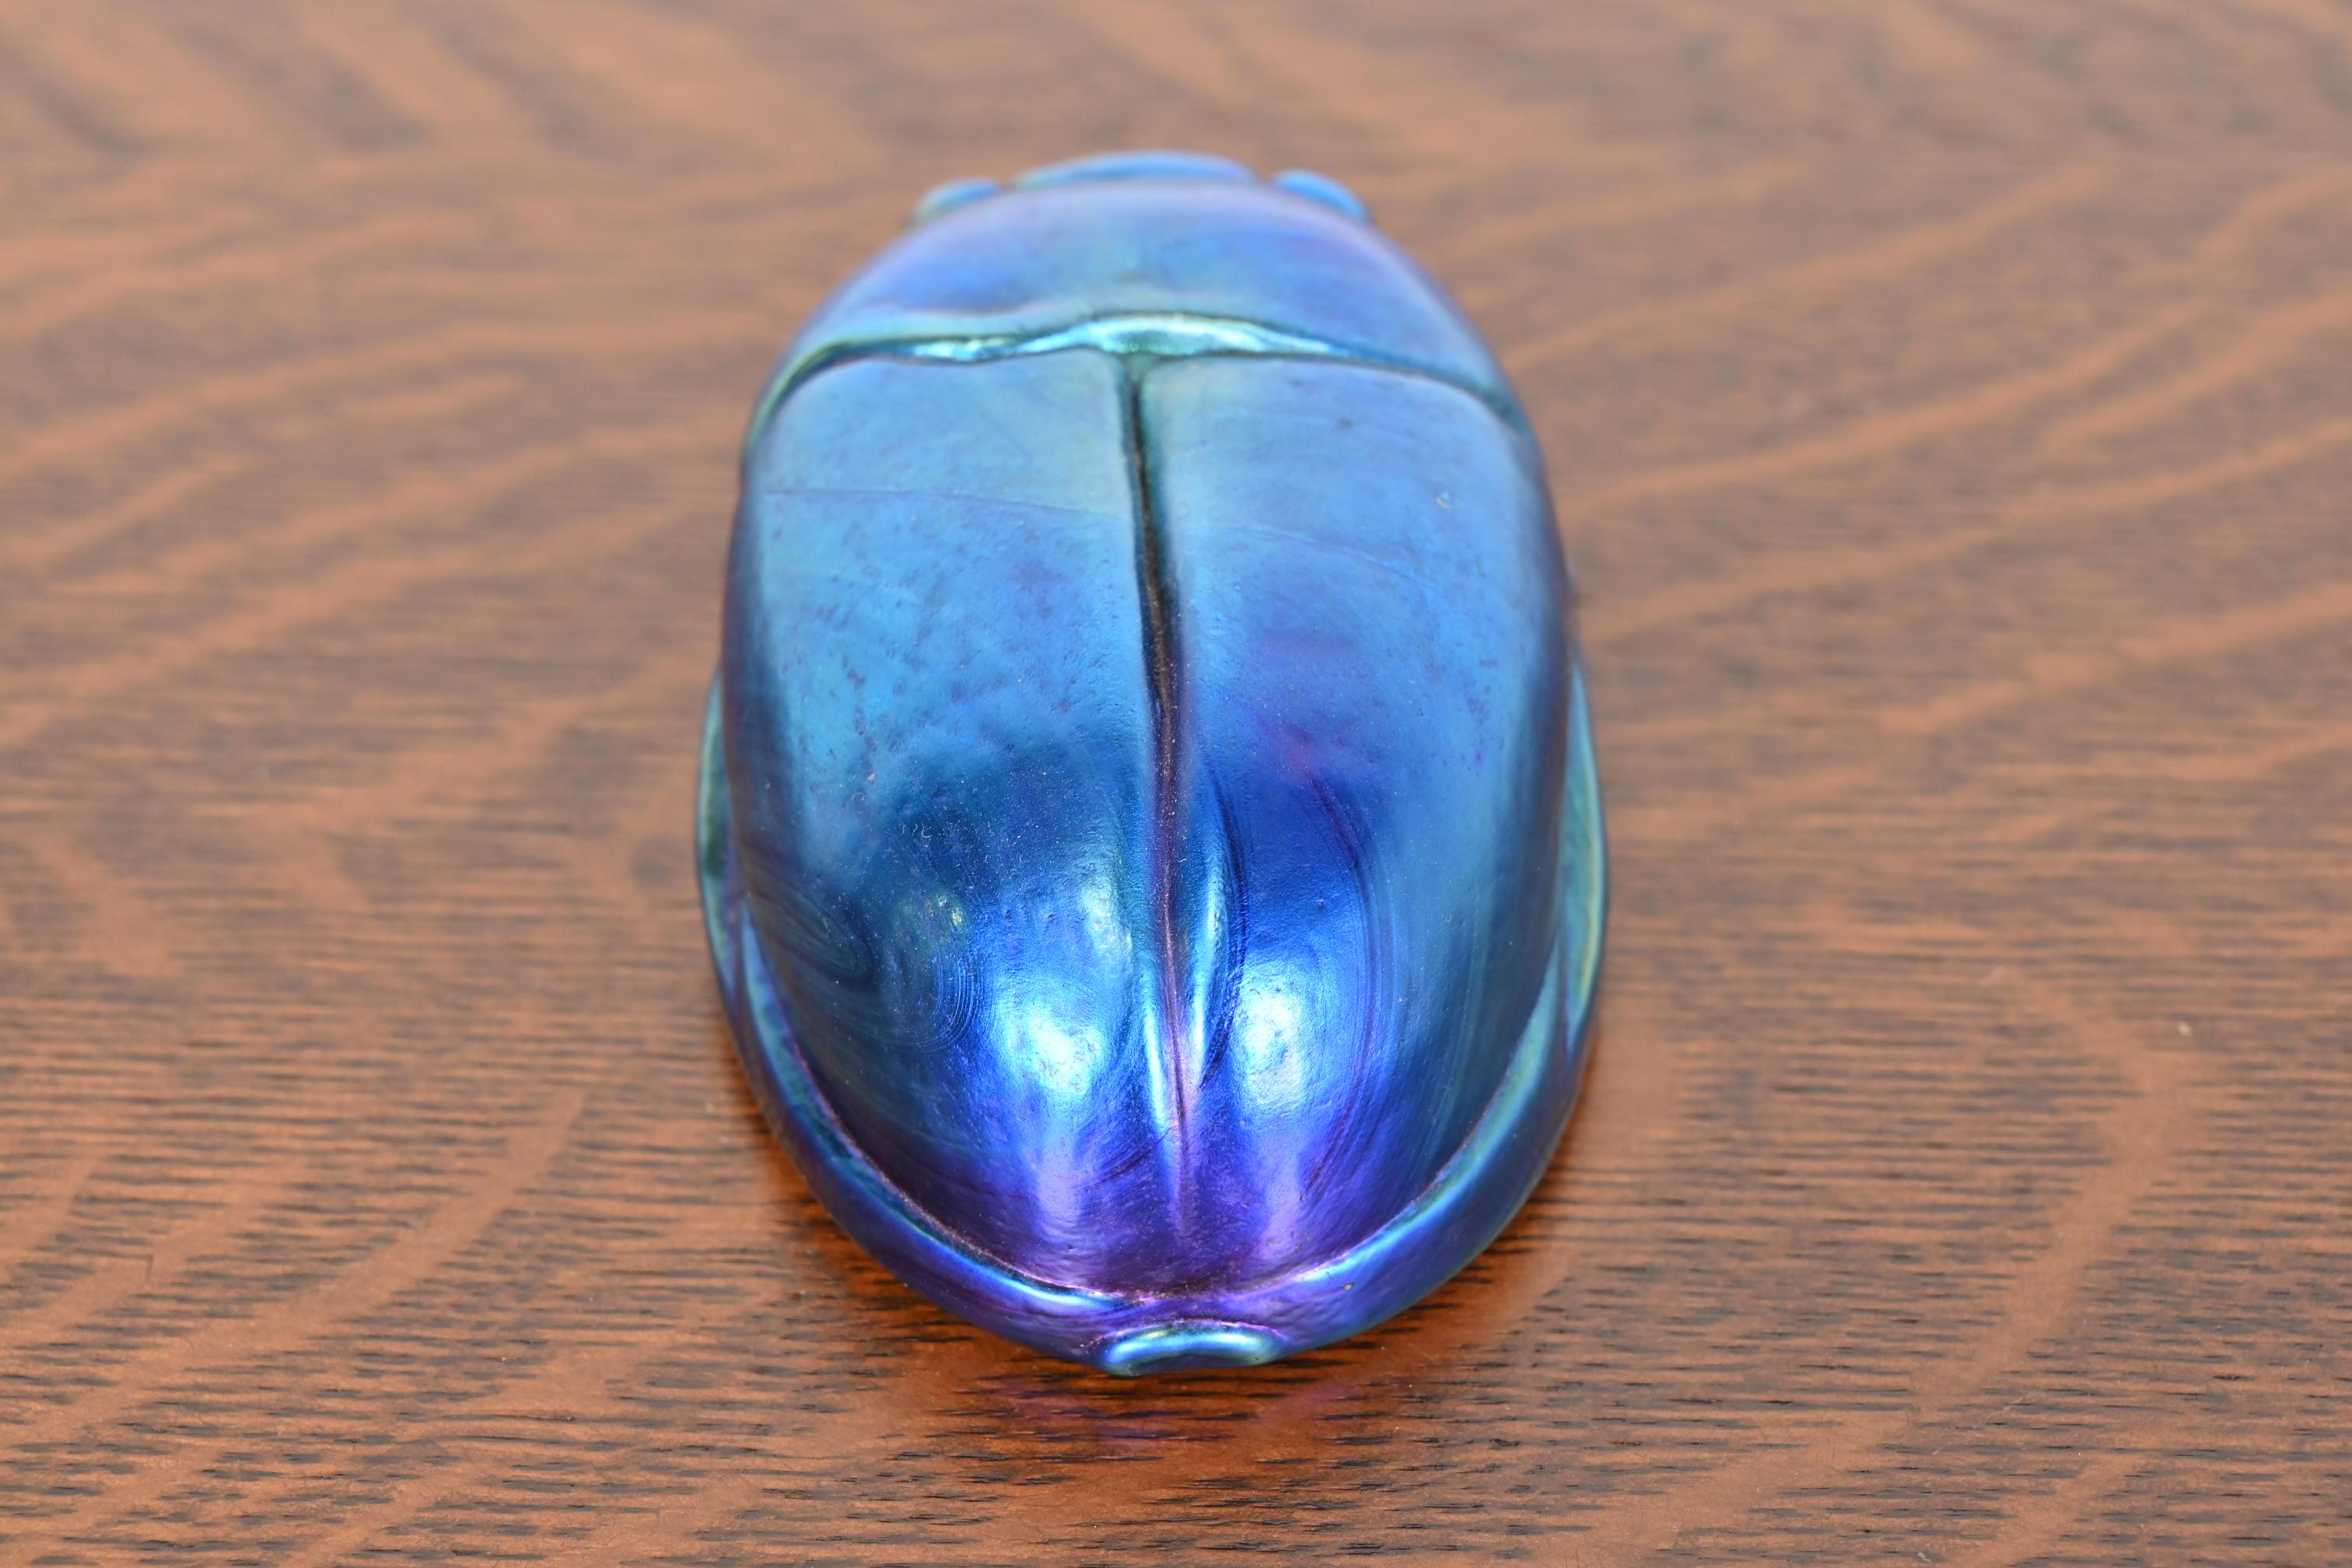 Tiffany Studios Style Iridescent Favrile Glass Scarab Paperweight For Sale 4